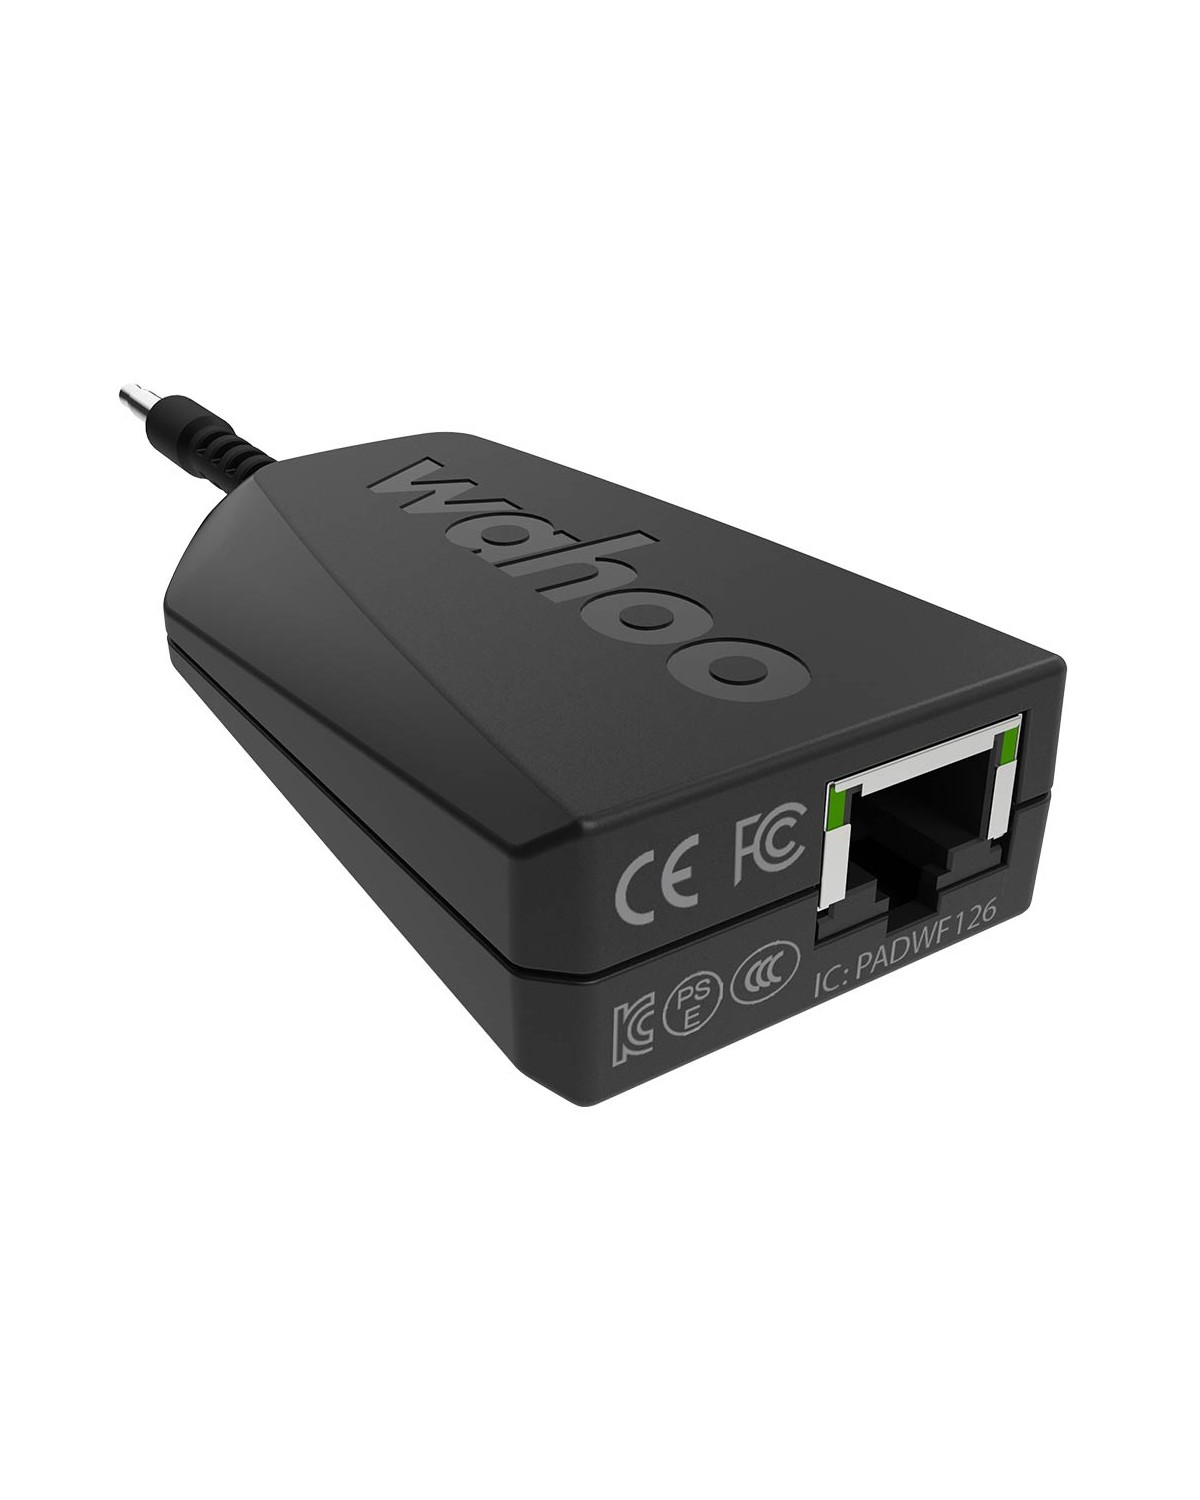 Wahoo Fitness KICKR DIRECT CONNECT Adapter